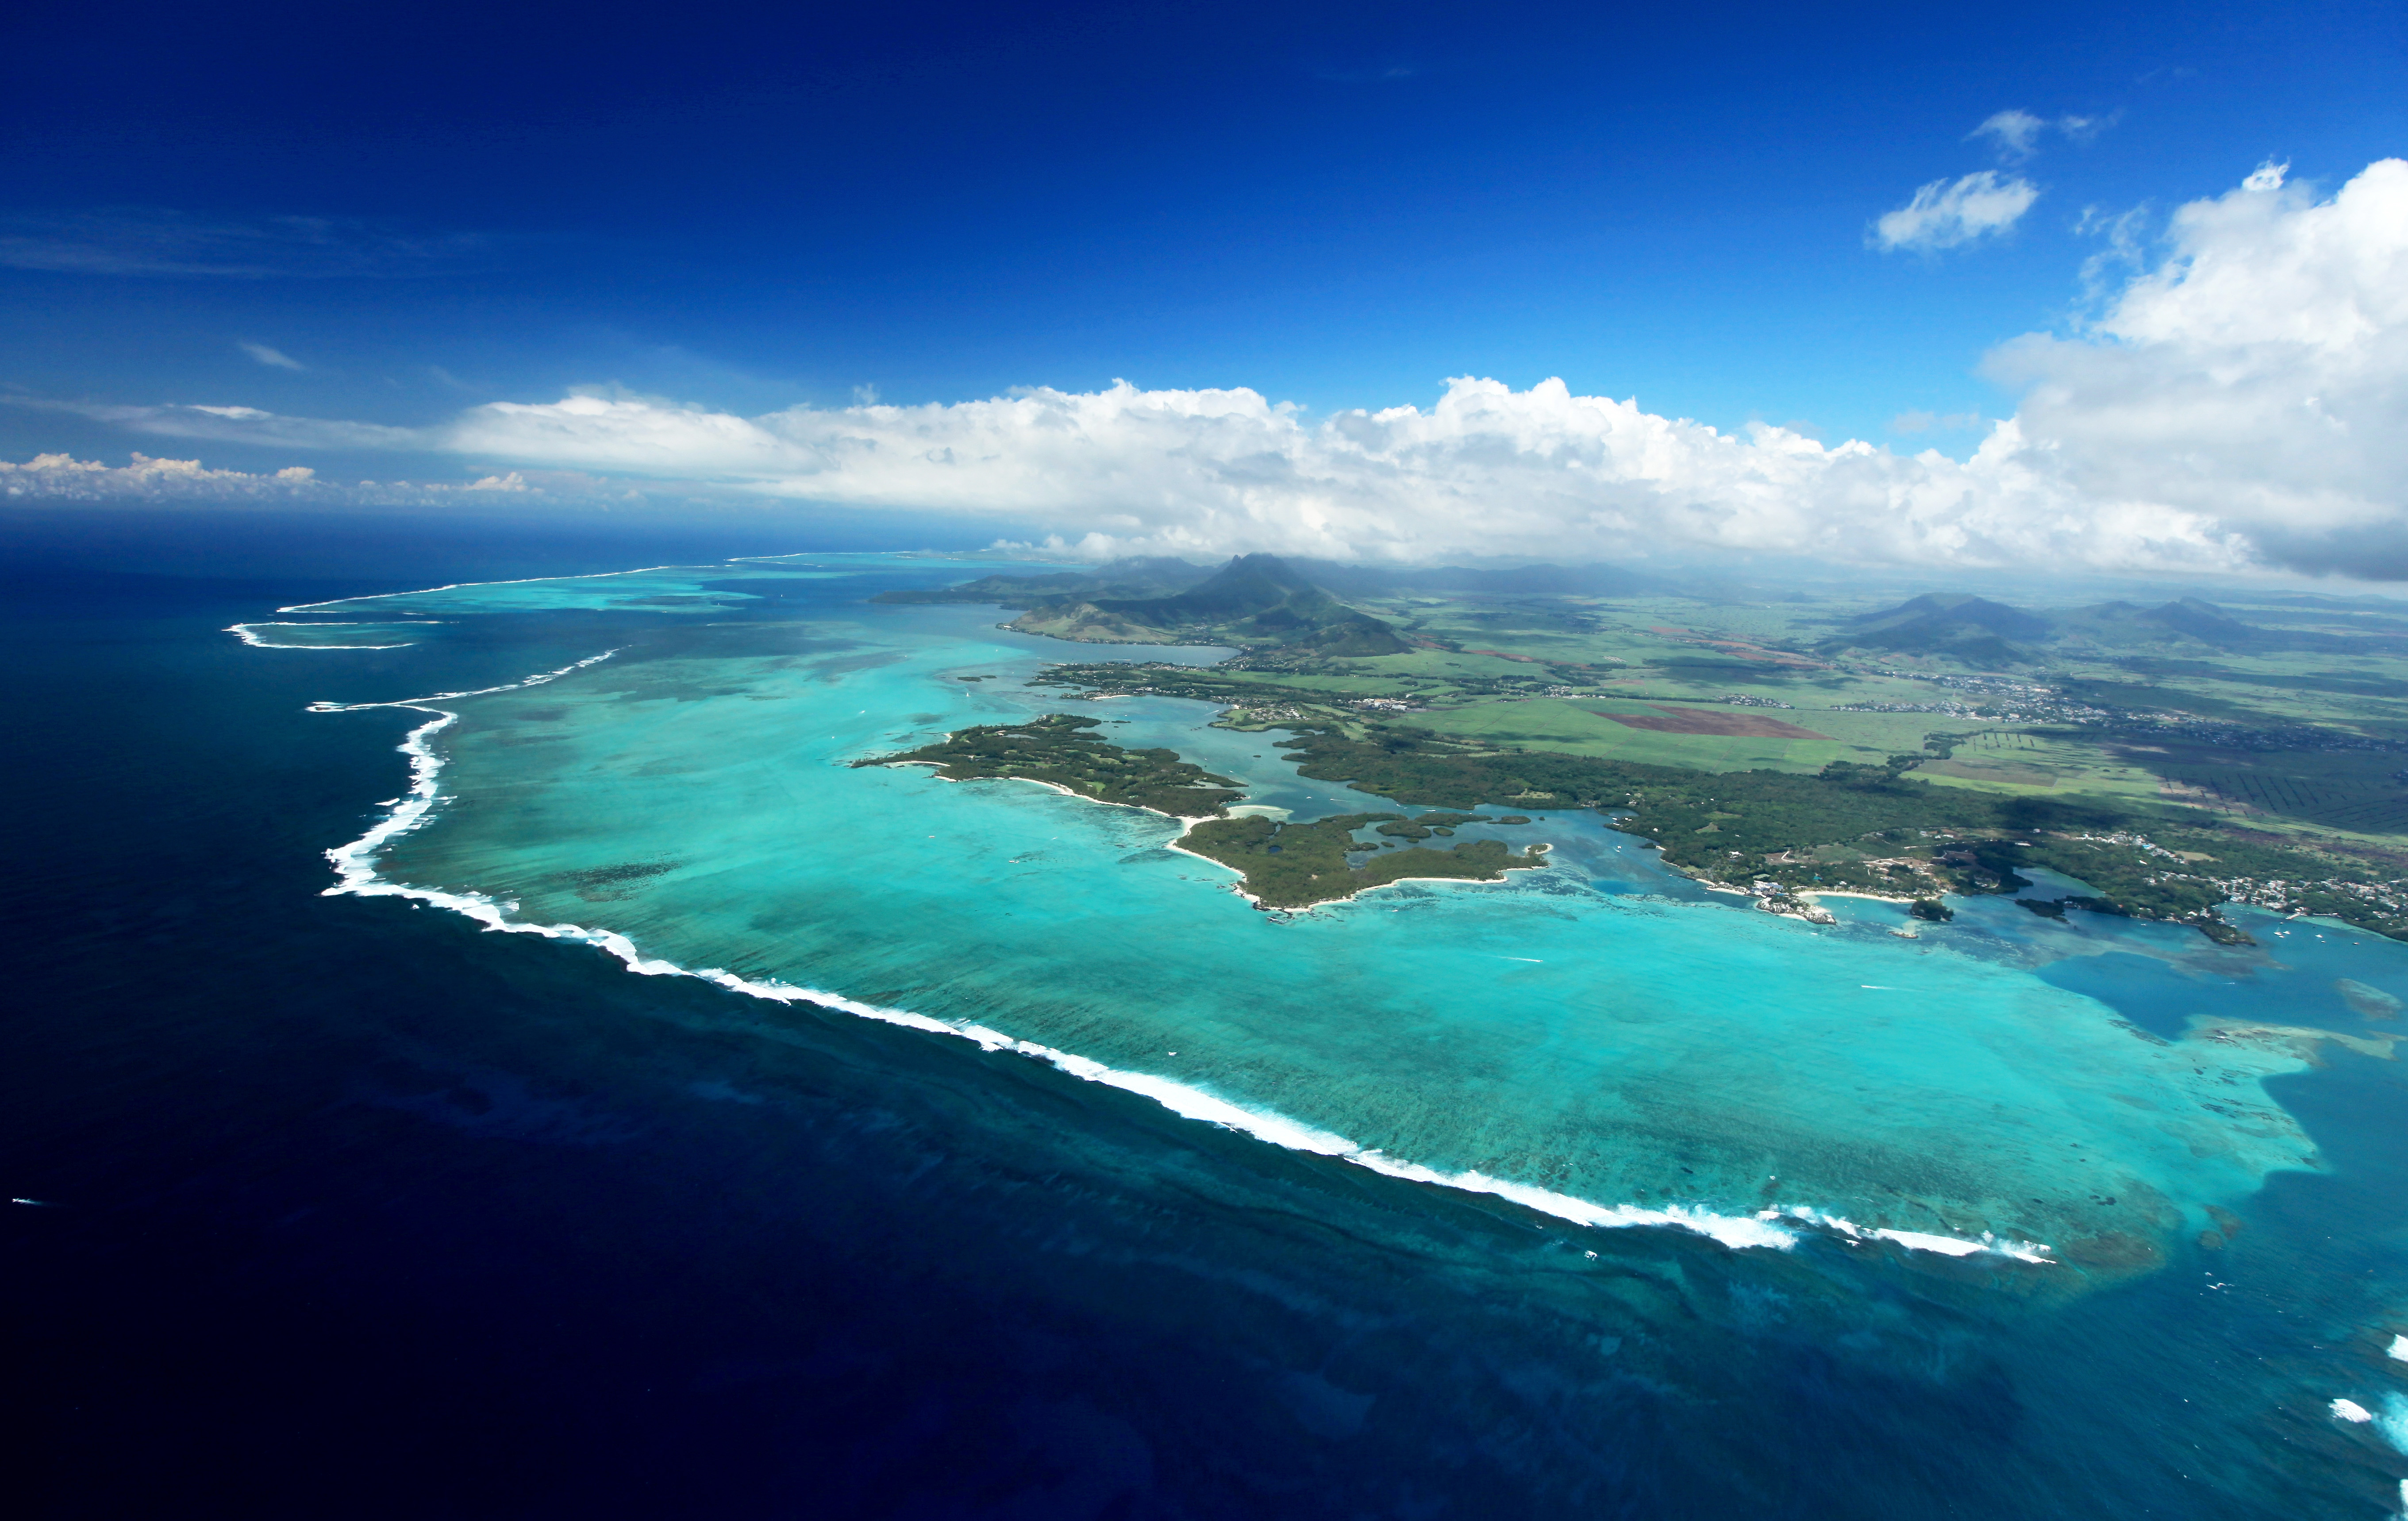 Mauritius lies off the south-east coast of Africa in the Indian Ocean (Photo: Getty Images)